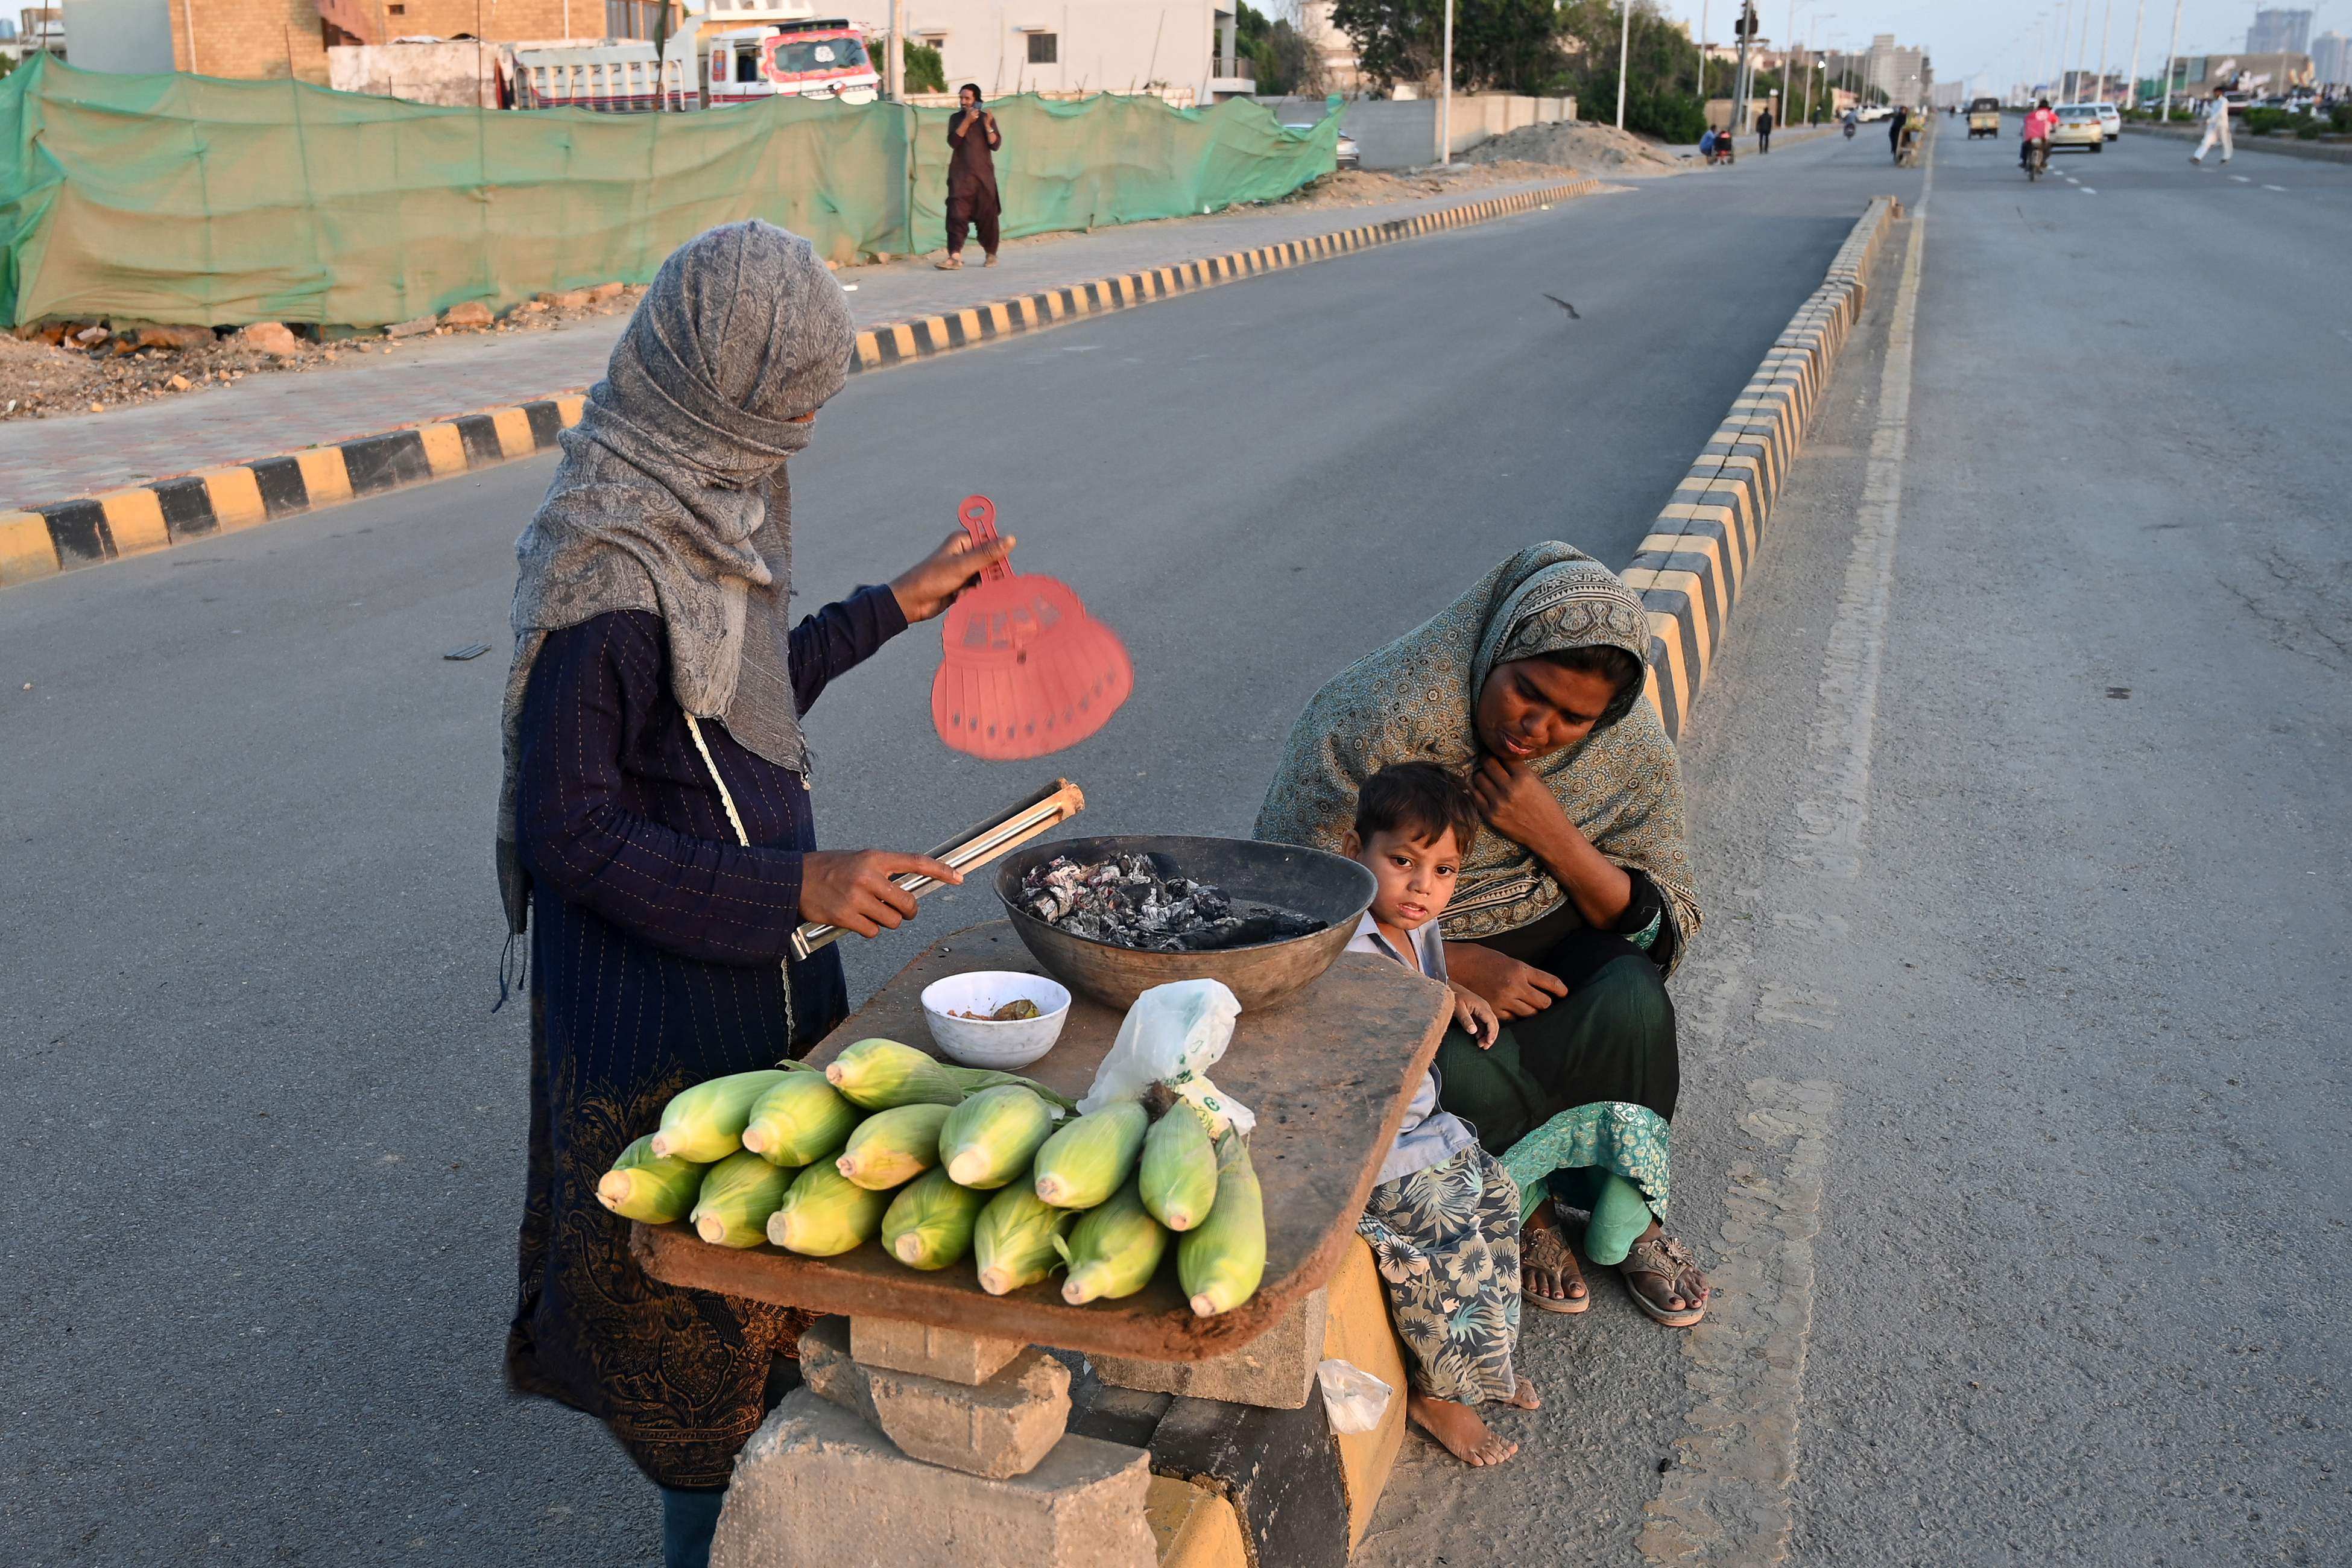 Women selling roasted corn wait for customers along the road in Karachi, Pakistan, on March 6. Photo: AFP